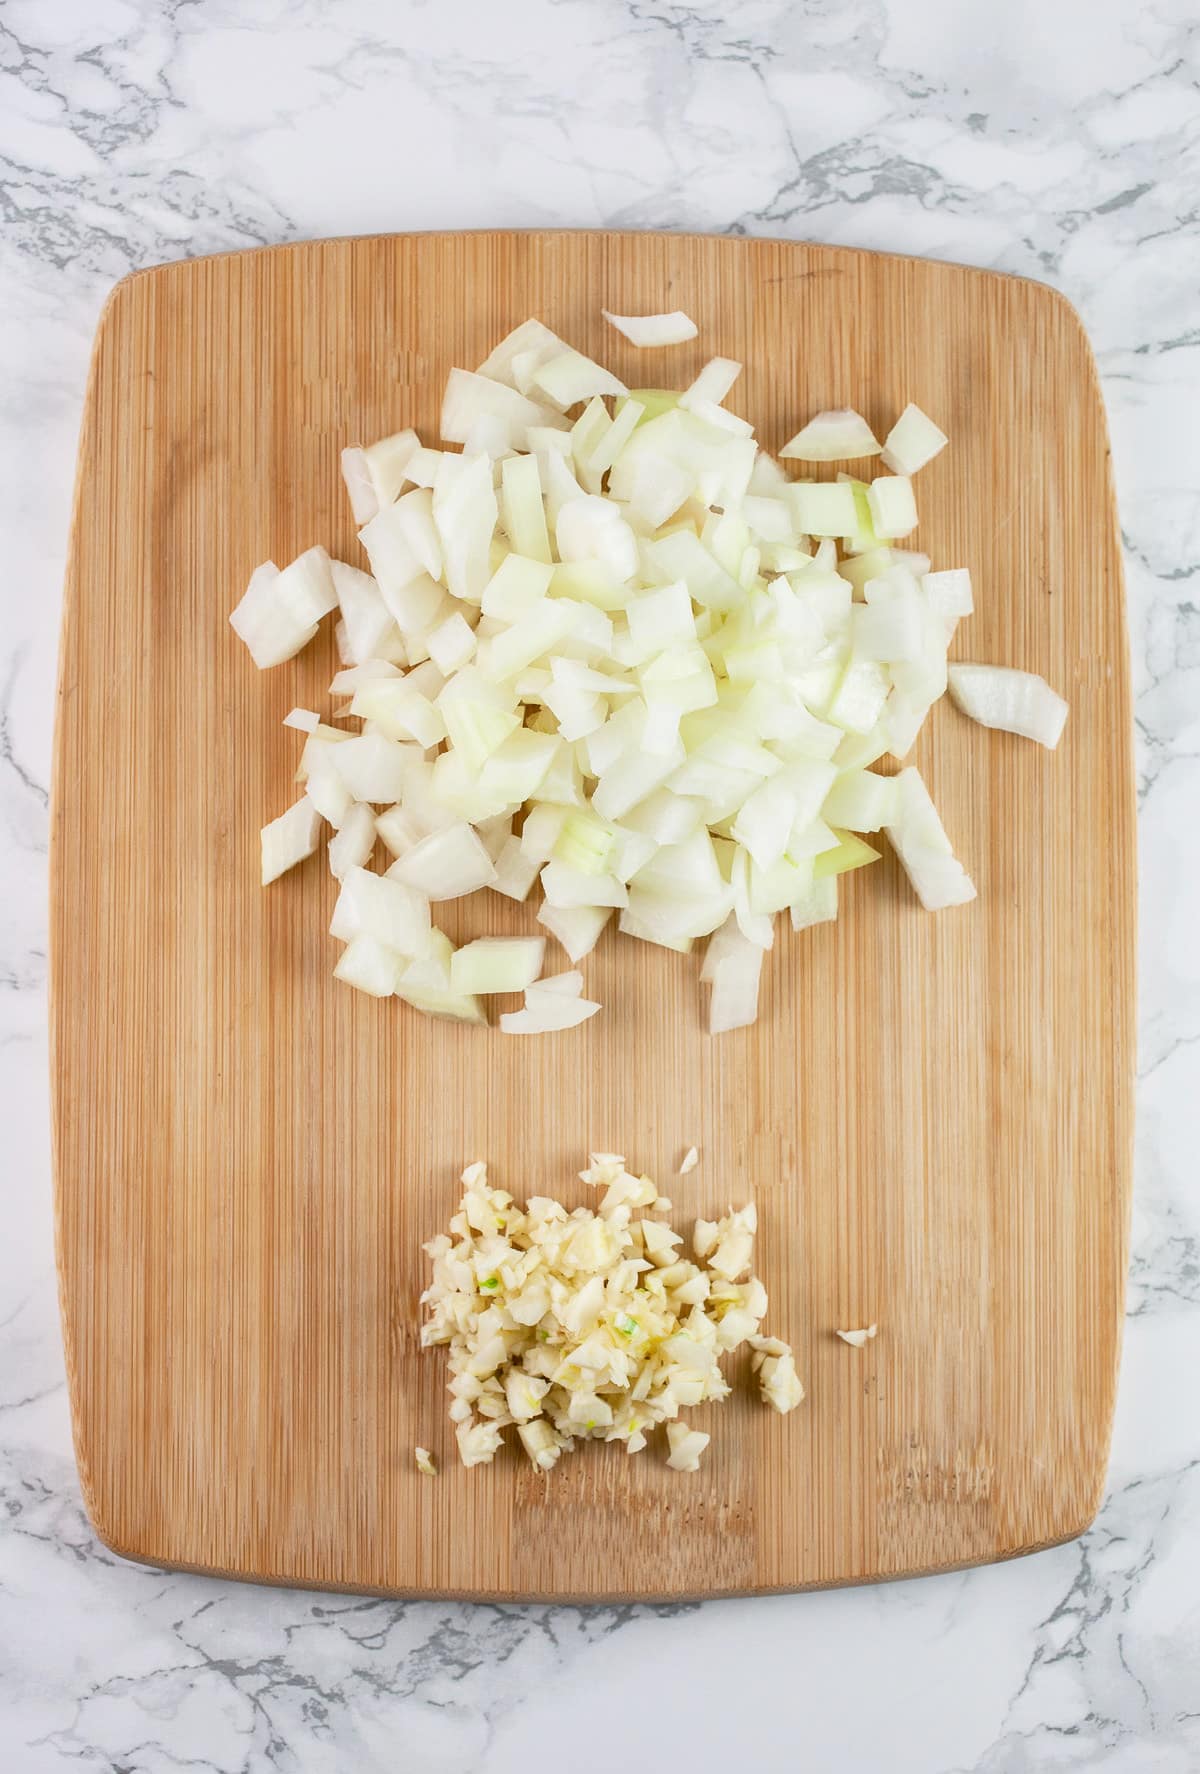 Minced garlic and onions on wooden cutting board.